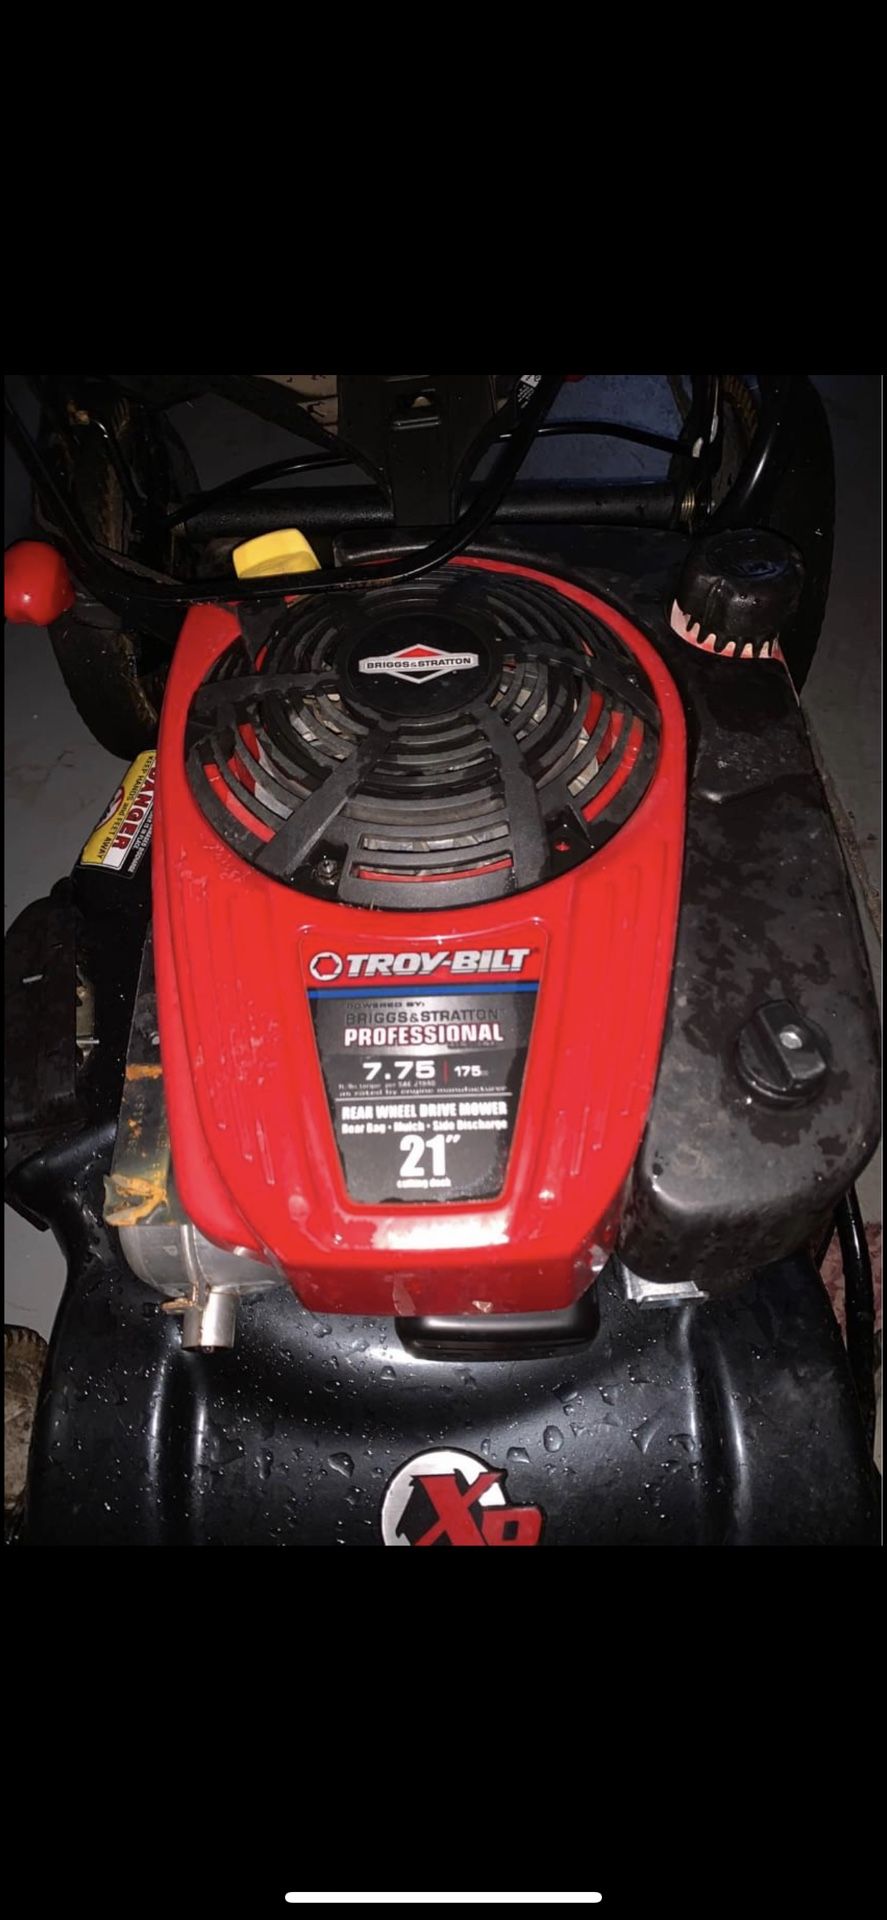 Troy bilt commercial Professional lawn mower! 7.75hp! Works great!